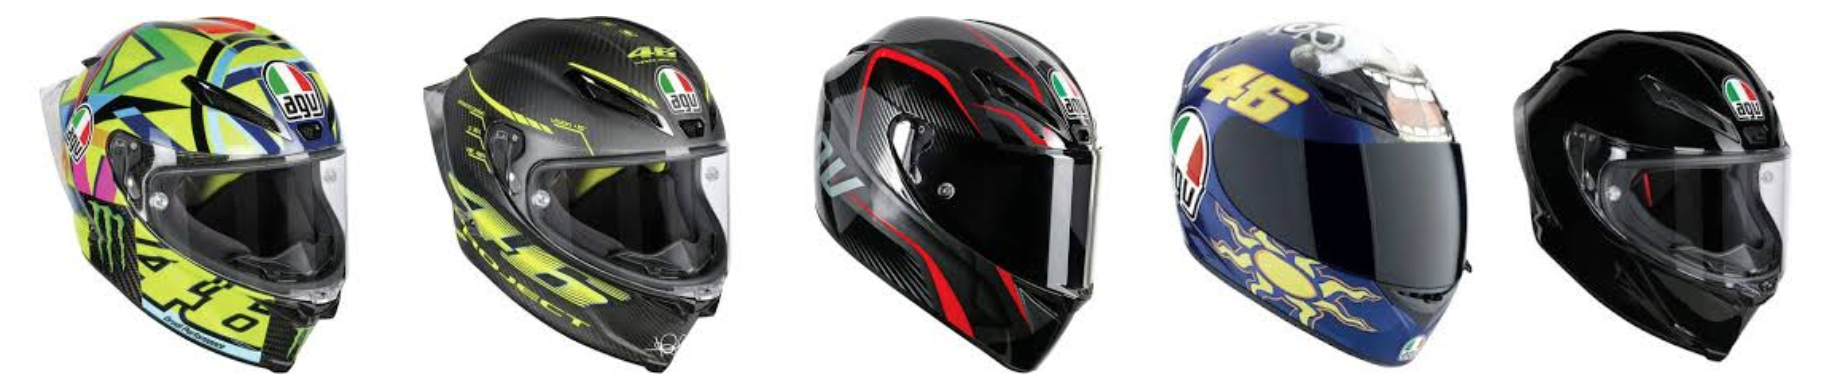 Motorcycle Helmet Reviews - Hands On Reviews for Over 20 Years